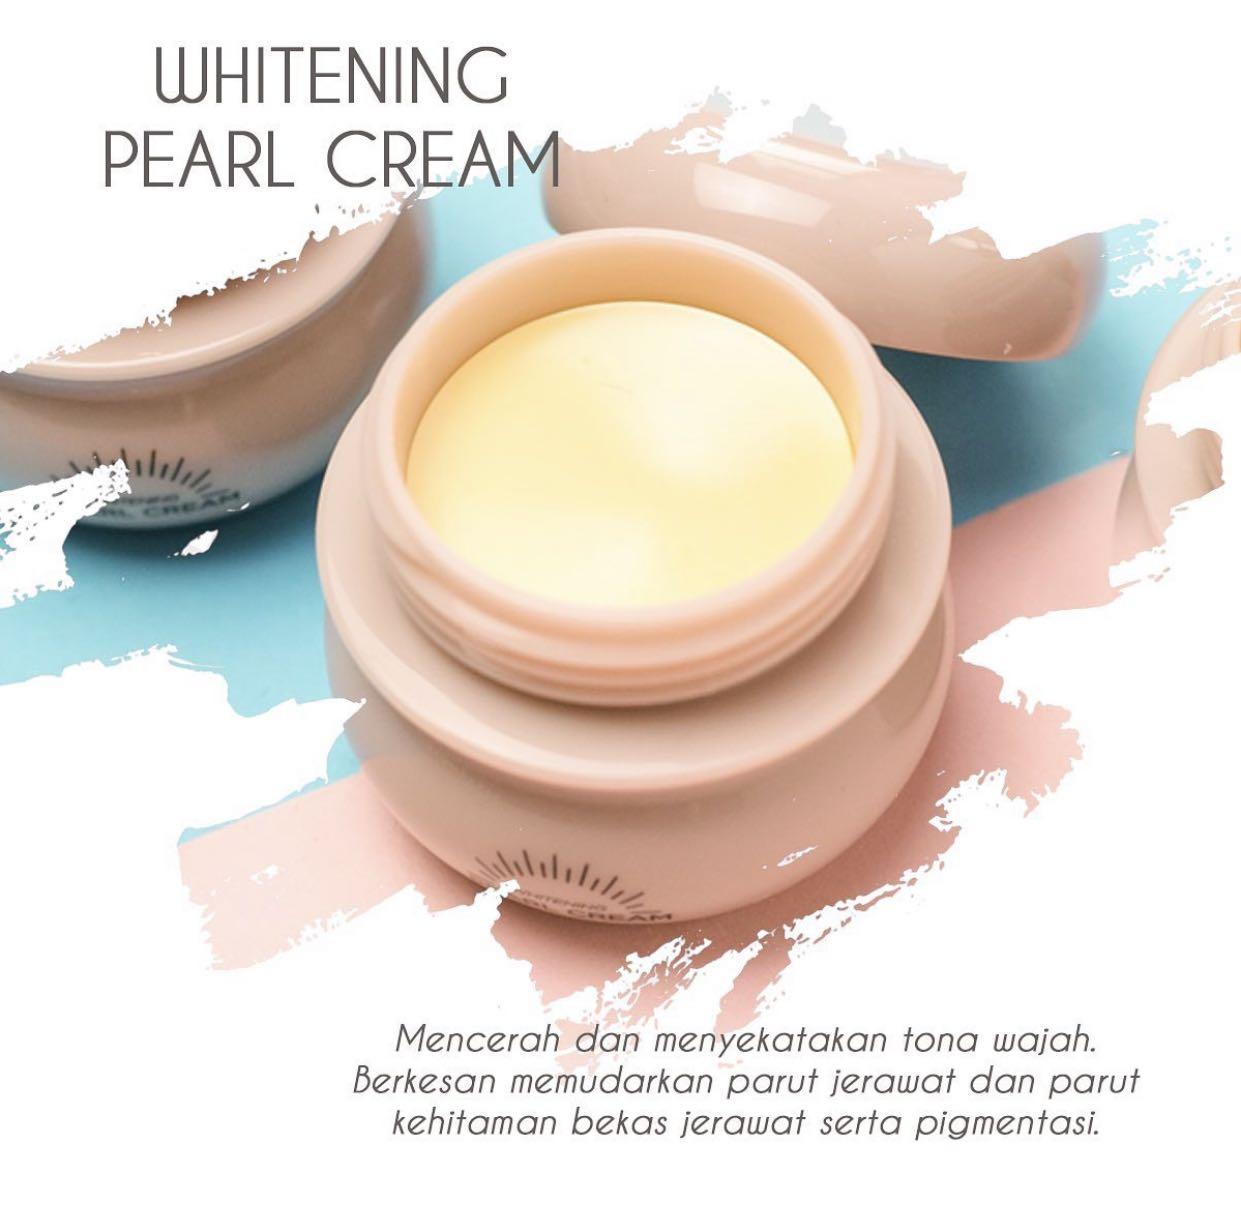 Pearl Cream Whitening Sendayu Tinggi Beauty Personal Care Face Face Care On Carousell